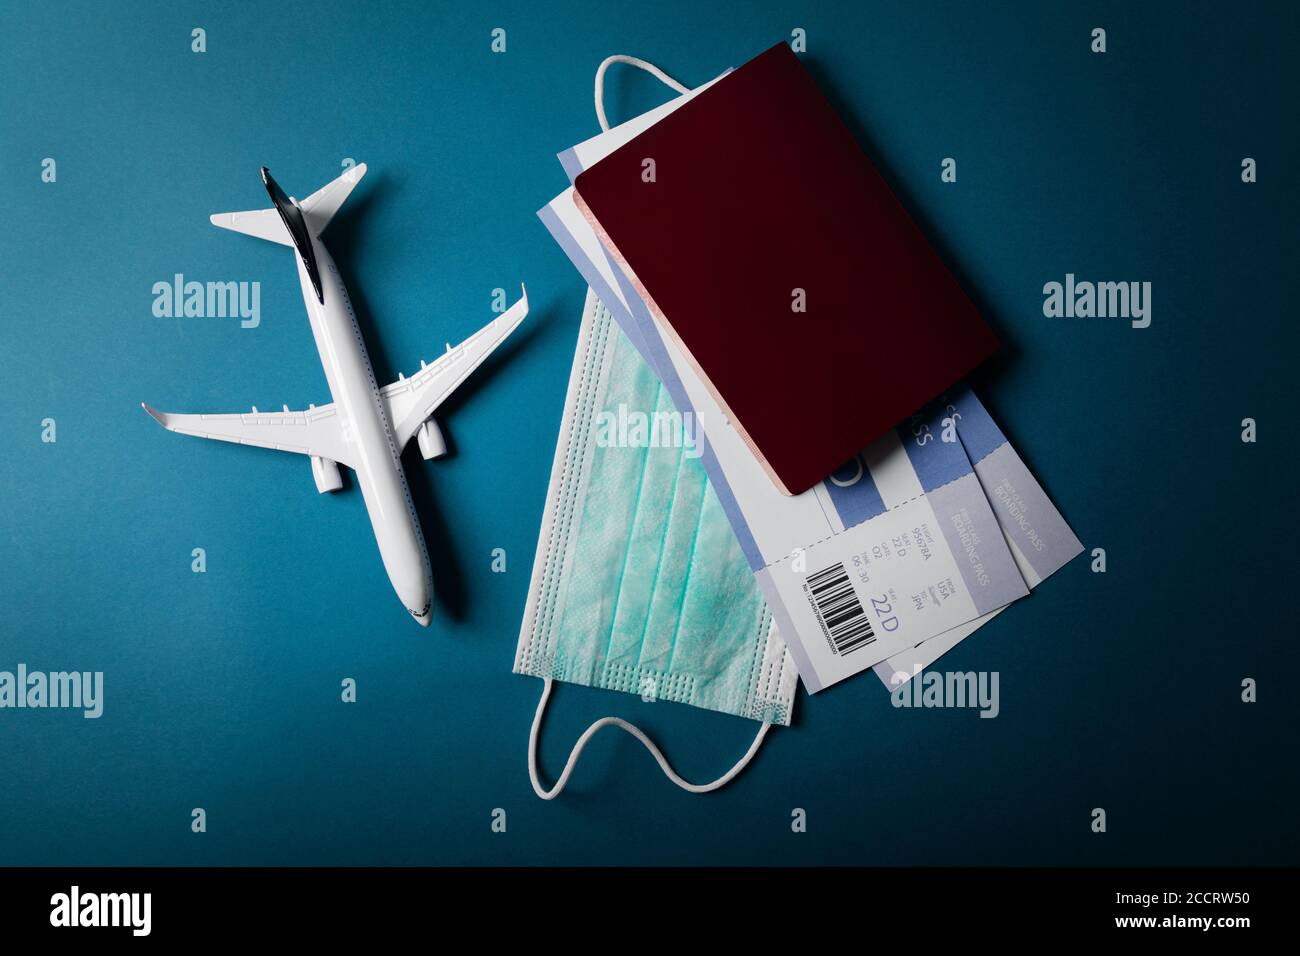 travel during the covid-19 pandemic. airplane model with face mask and travel documents Stock Photo